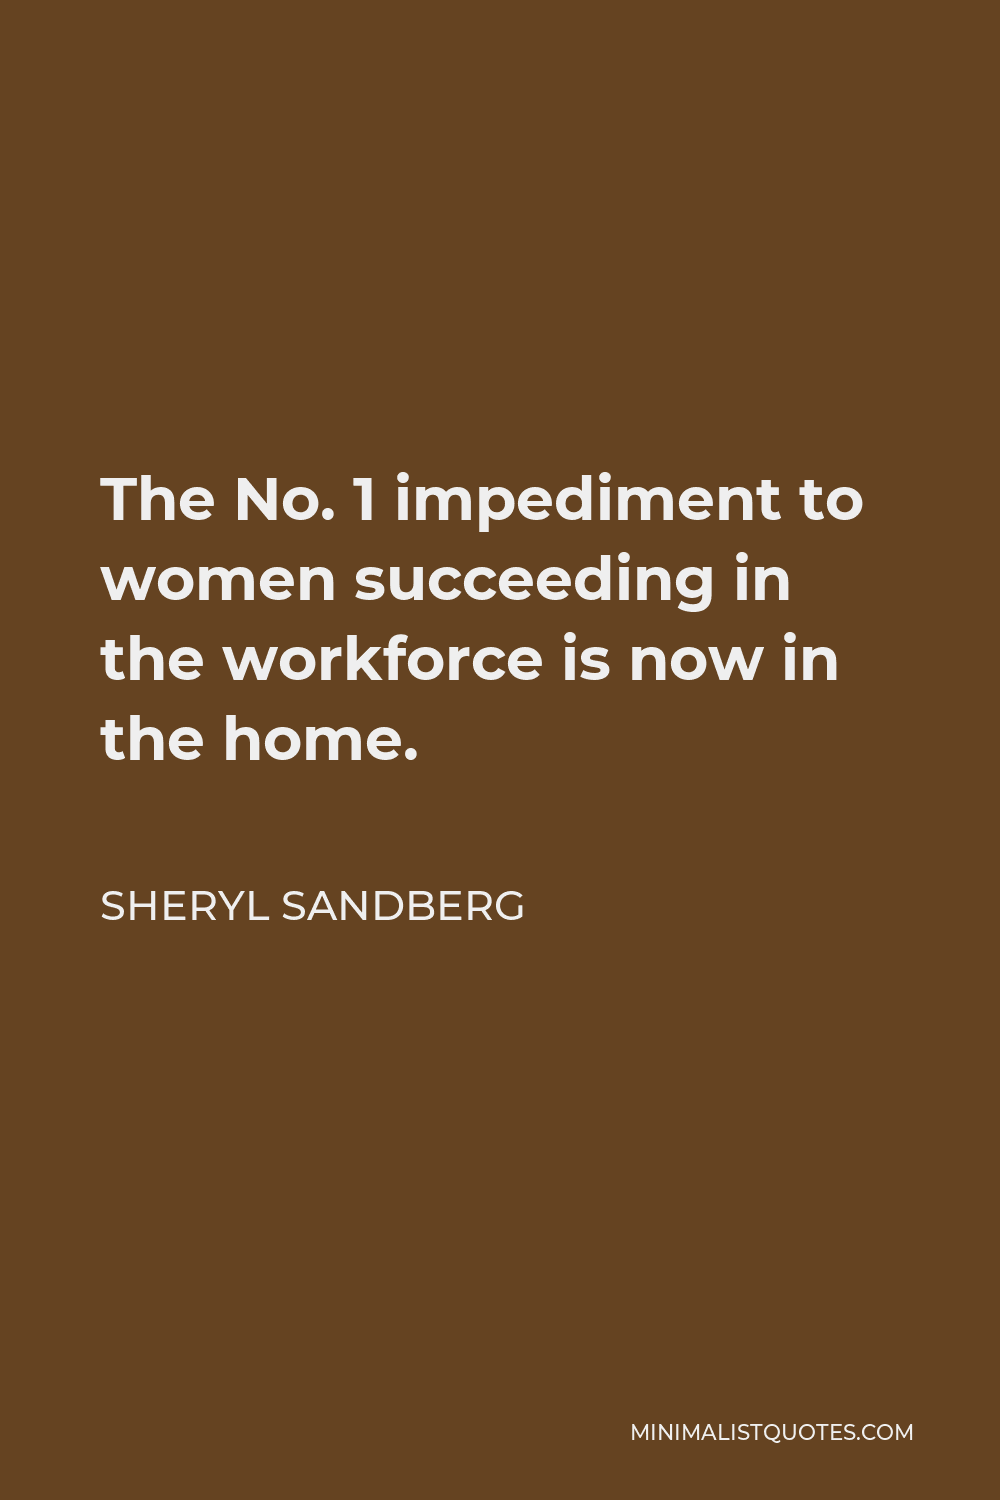 Sheryl Sandberg Quote - The No. 1 impediment to women succeeding in the workforce is now in the home.